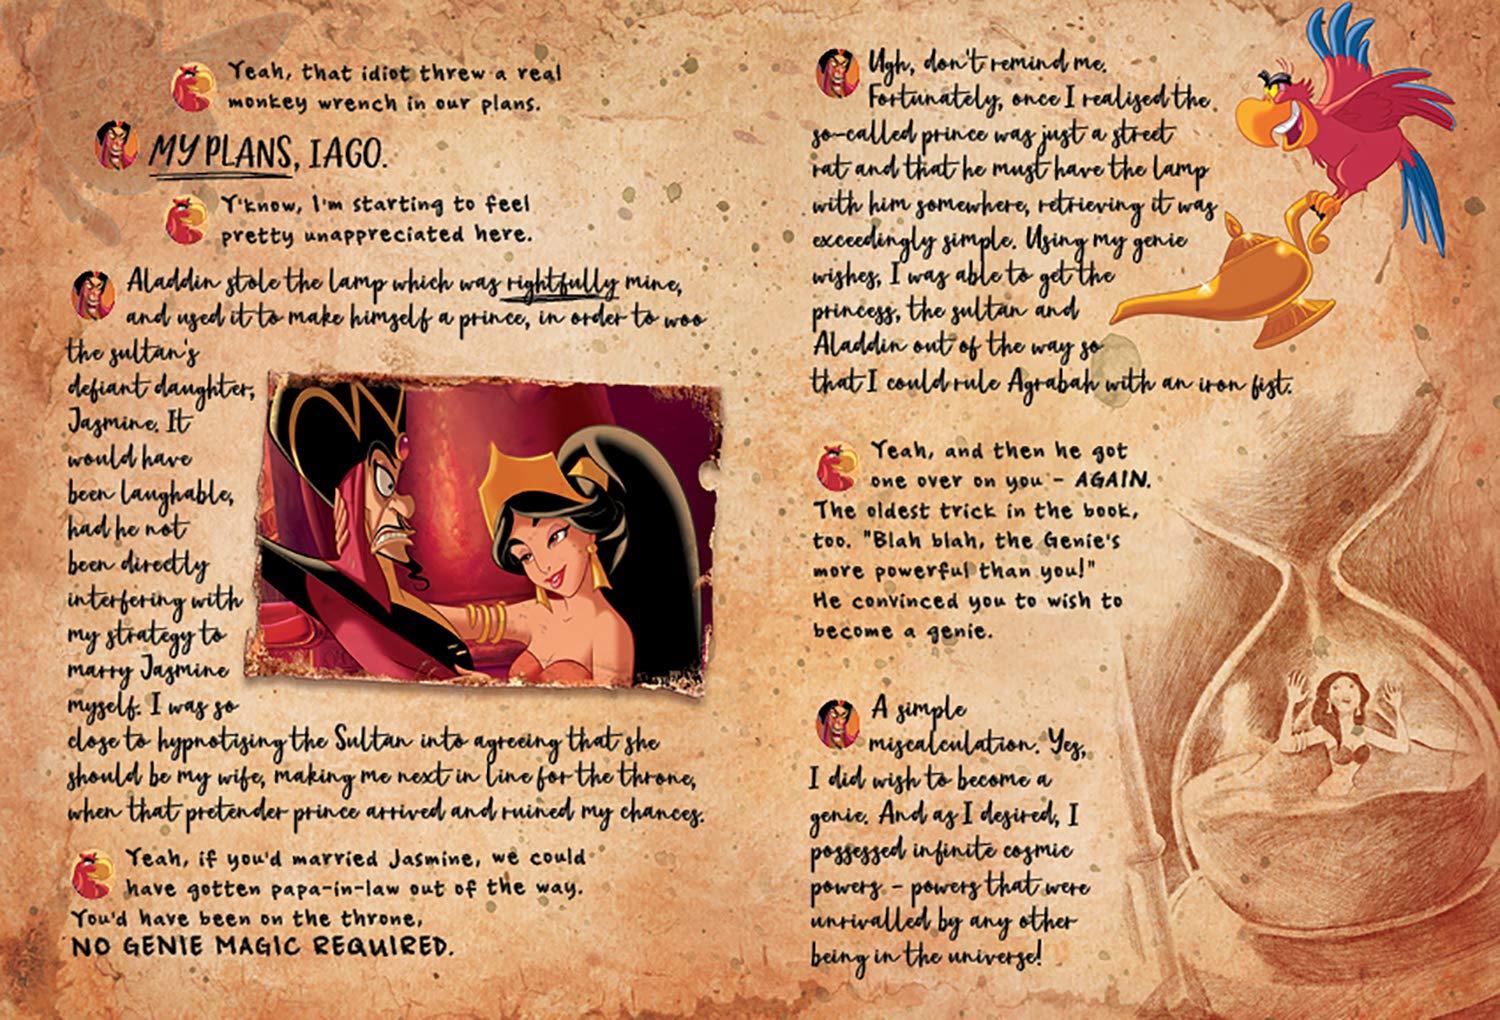 Disney Villains The Evilest Of Them All (Fact Book)